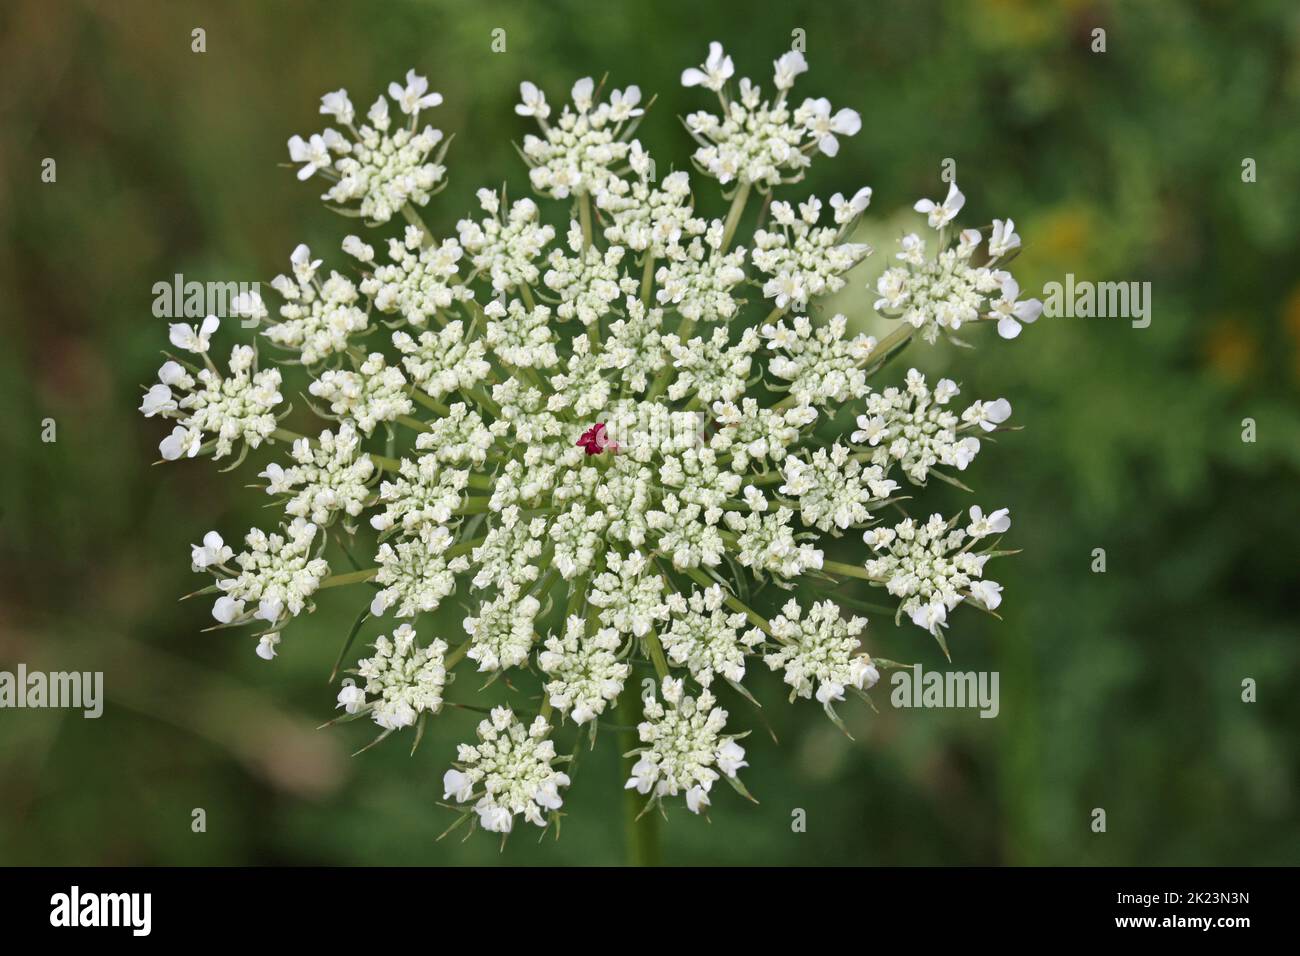 Wild carrot, Daucus carota, flower umbel in close up seen from above with a blurred background of leaves. Stock Photo